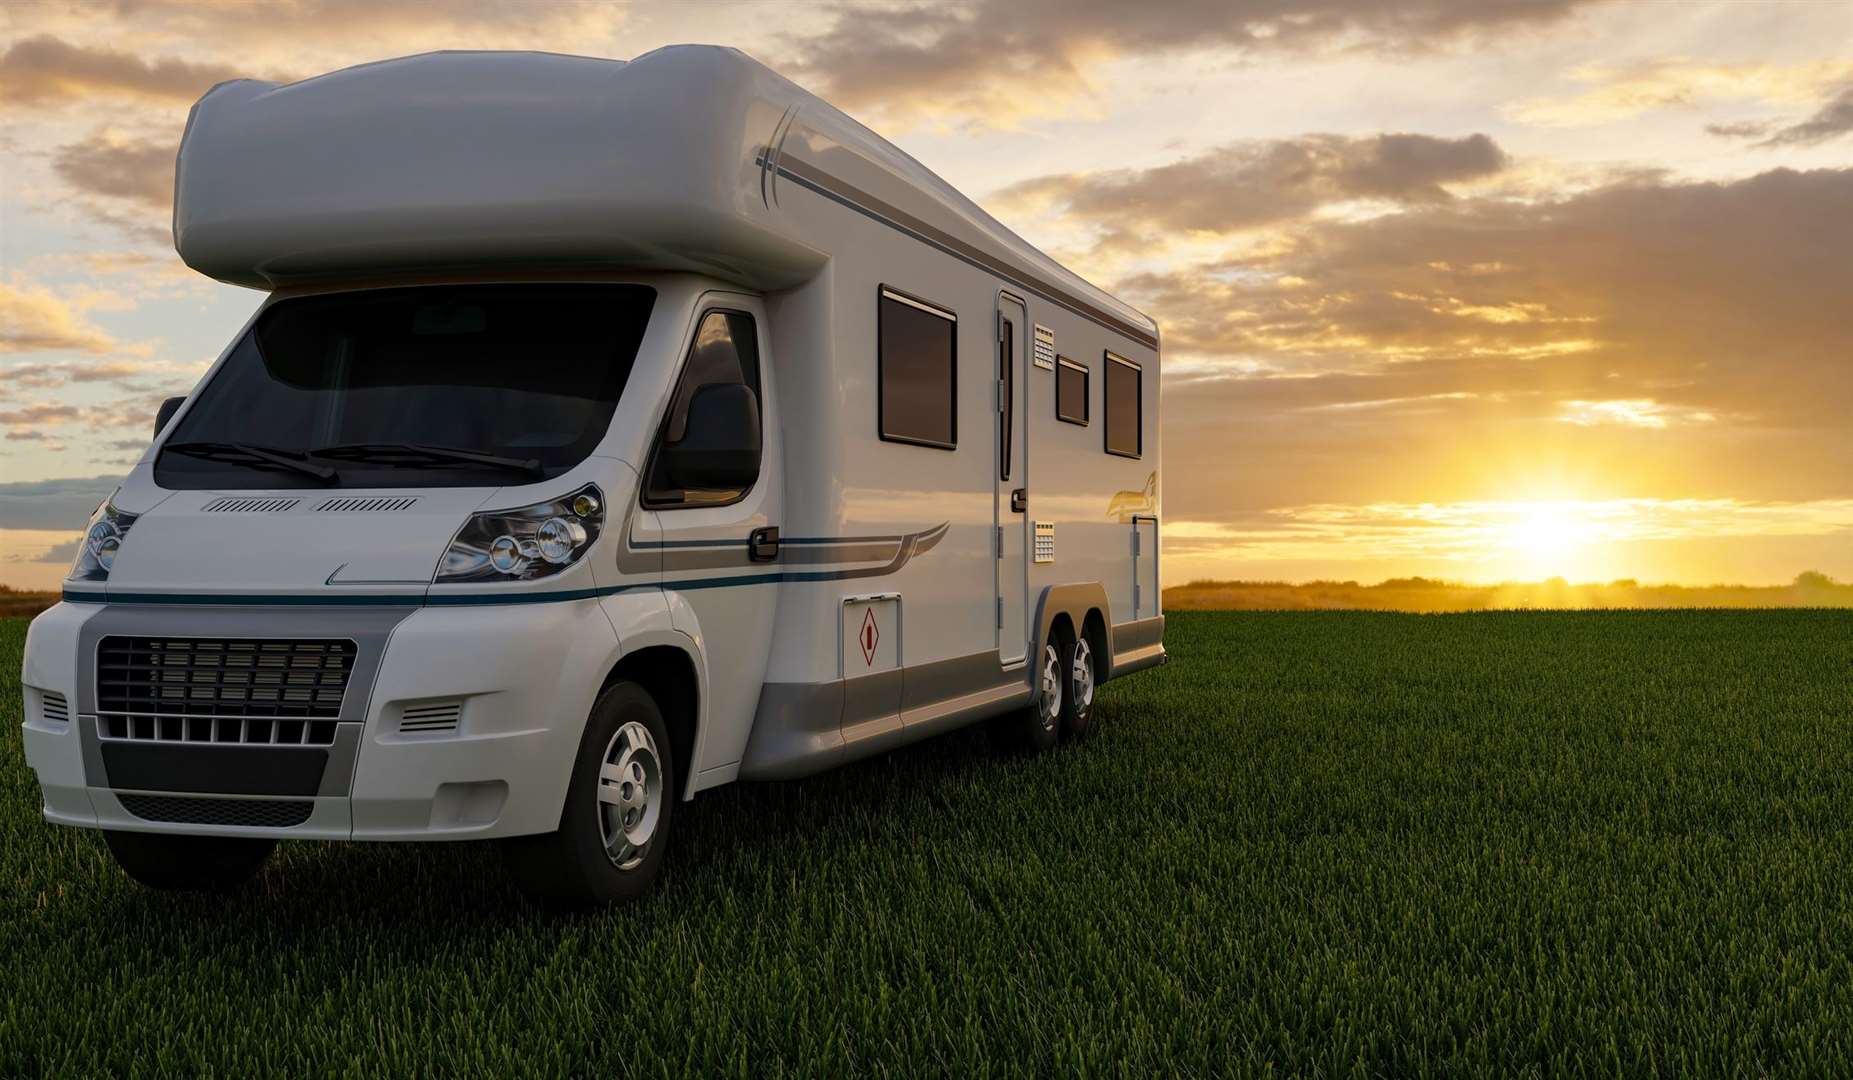 Secret Thinker is now a campervan convert. Picture: iStock